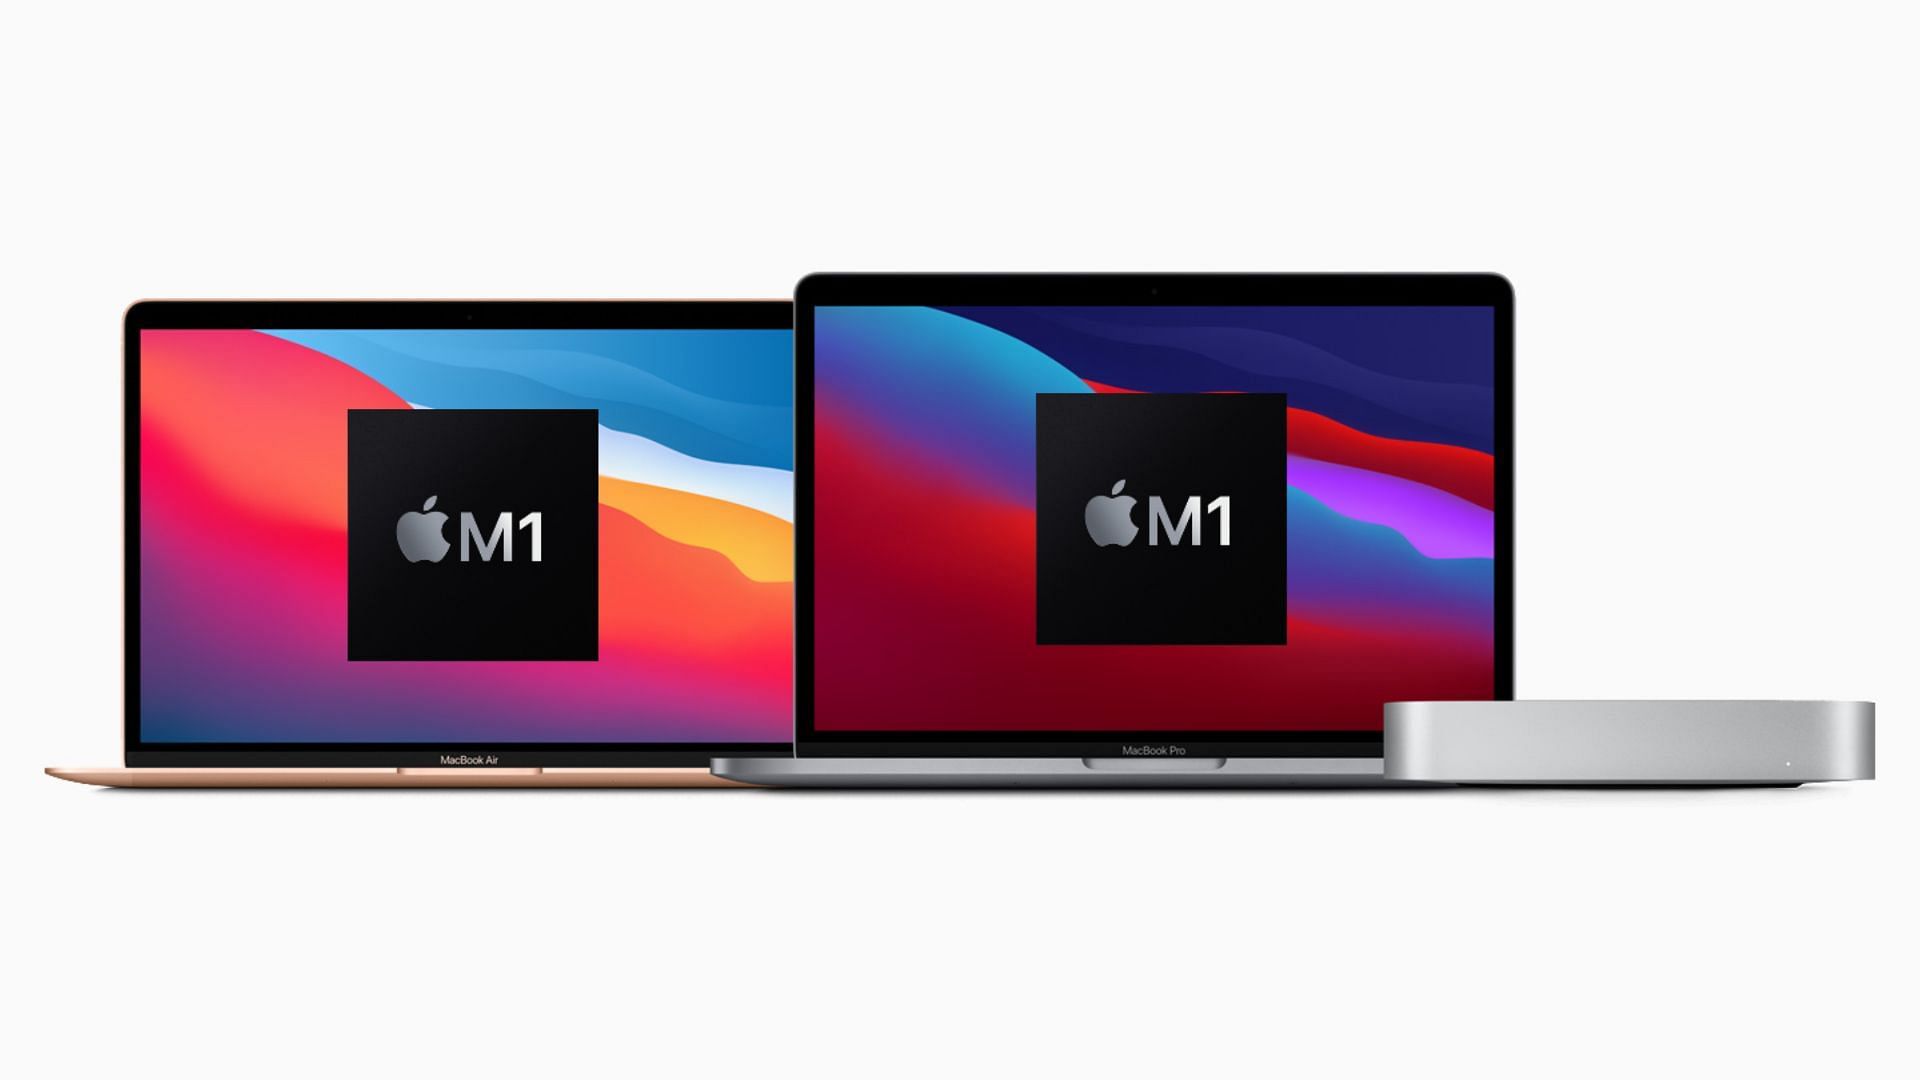 The M1 MacBook Air is perfect for students to get on a discount to meet their different needs (Image via Apple)